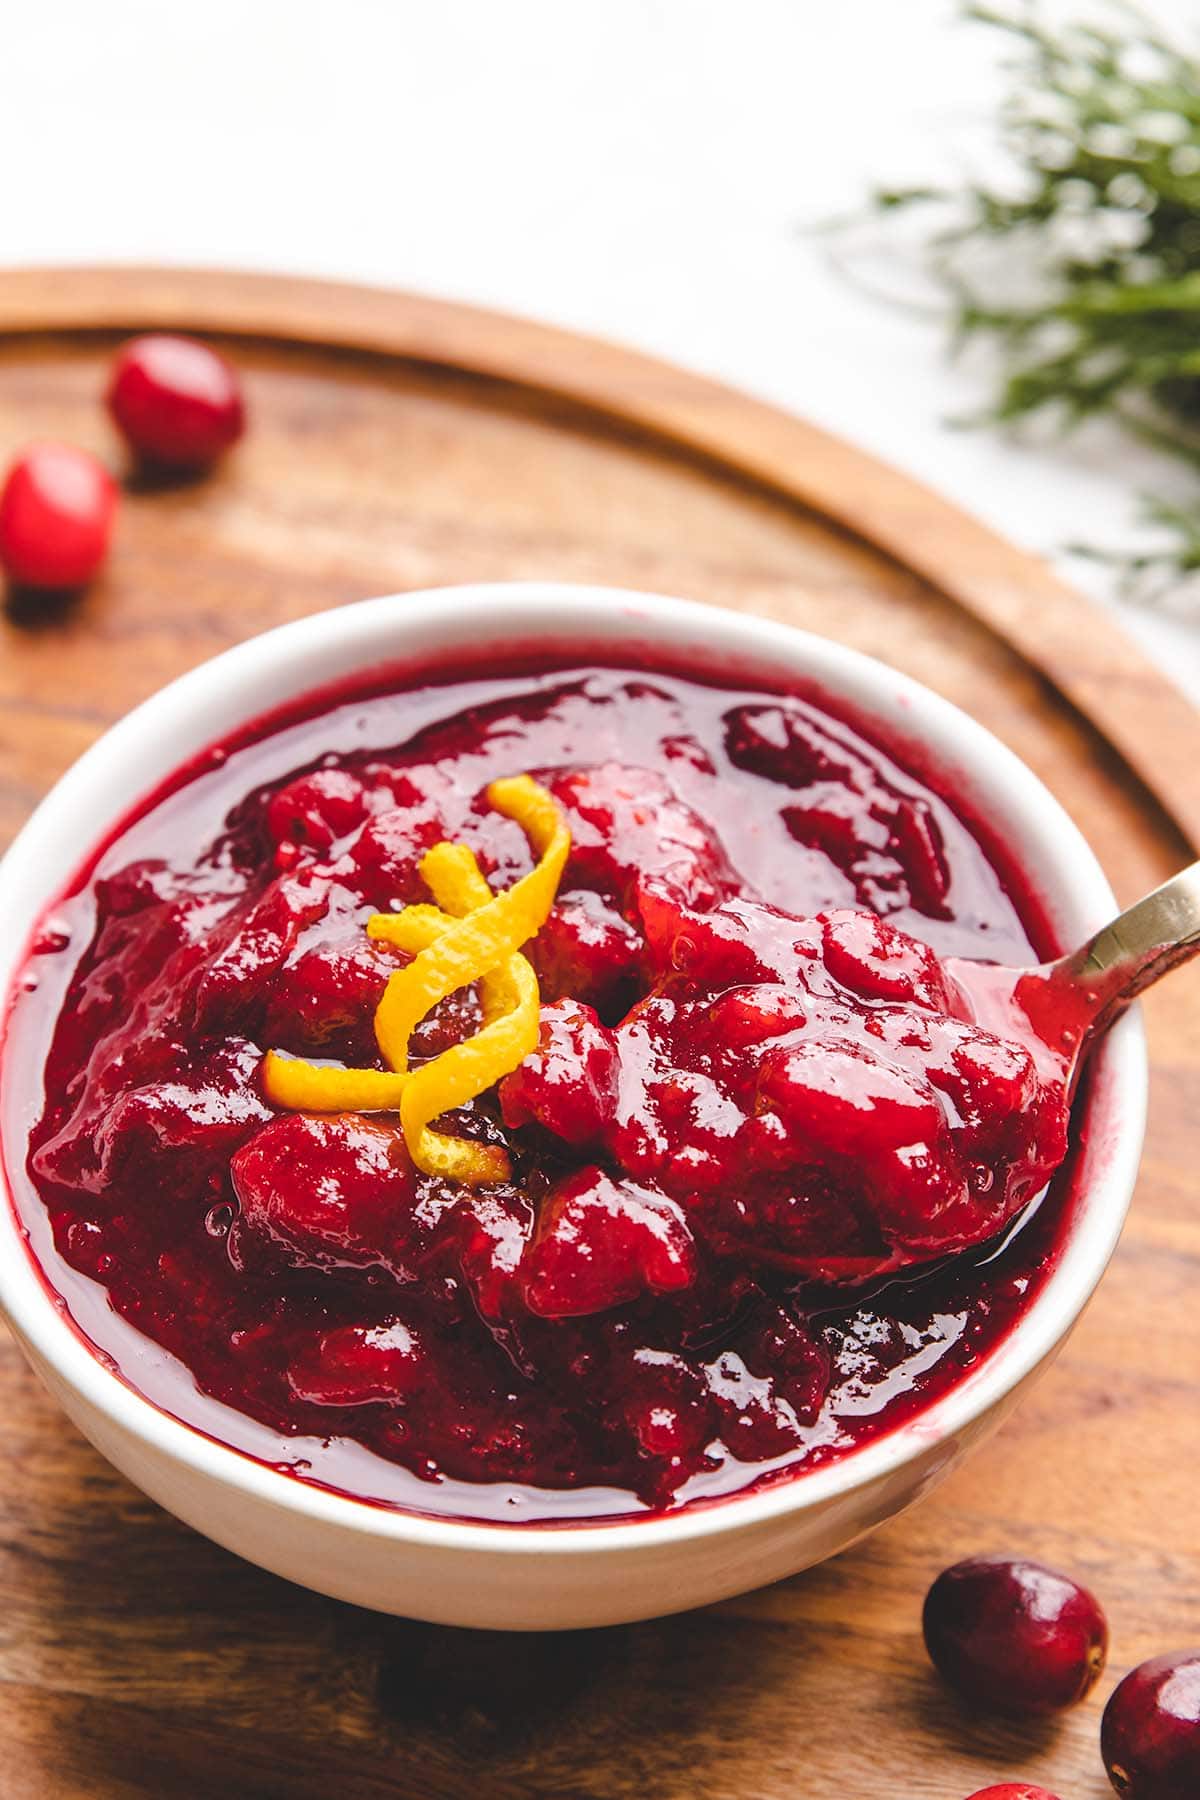 A spoonful of cranberry sauce being taken from a bowlful, garnished with orange peel curls.